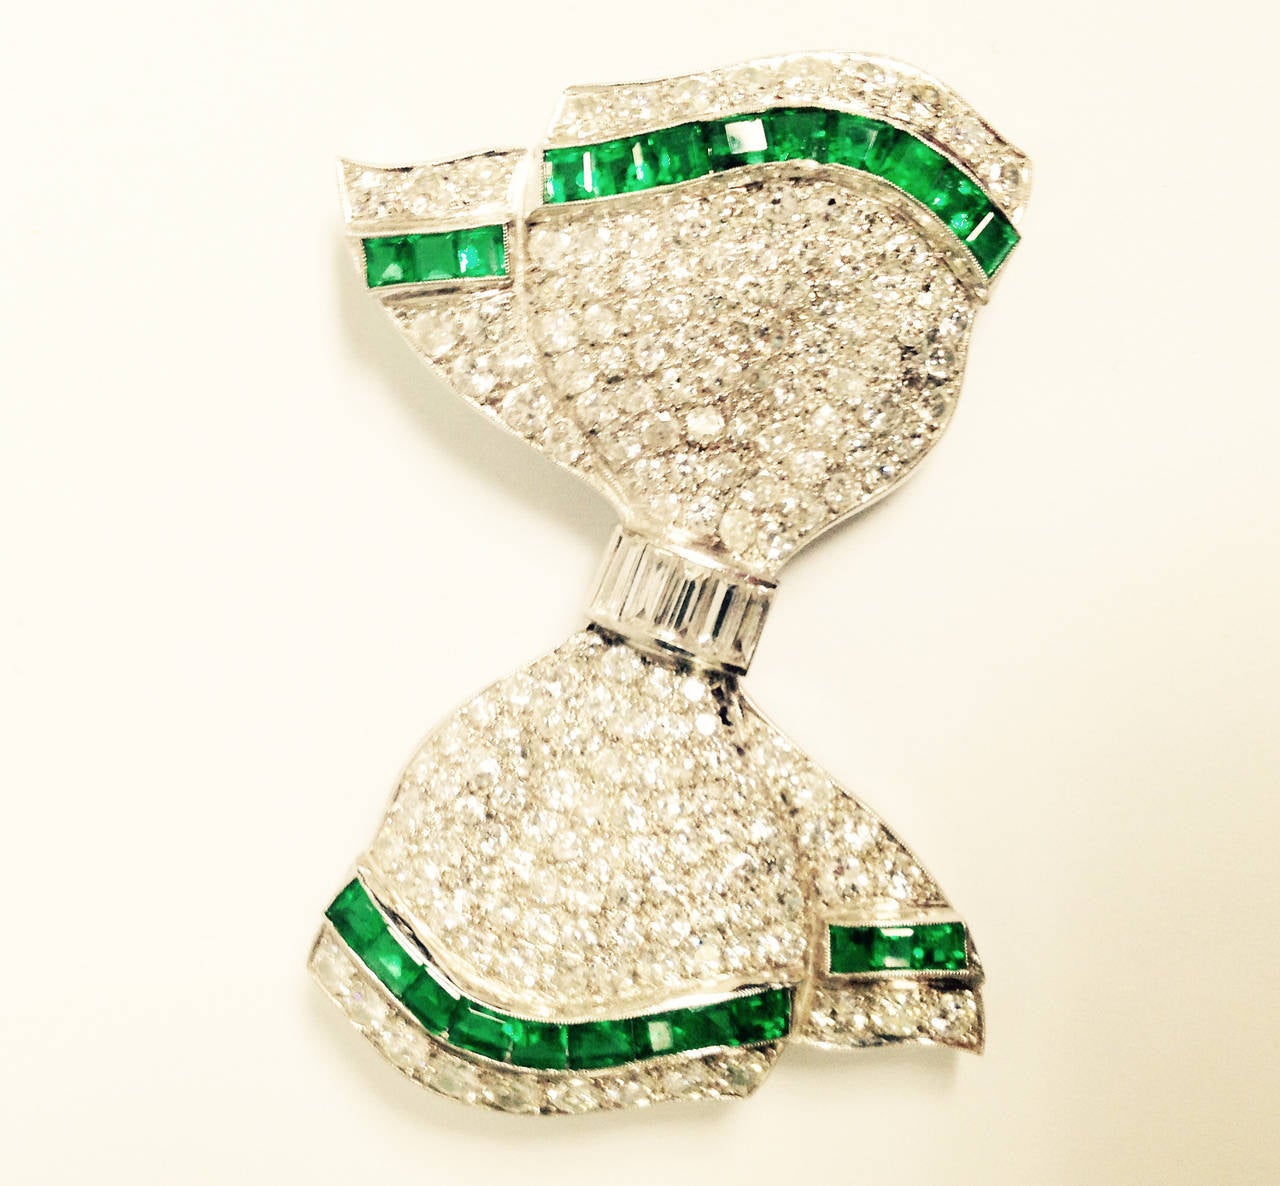 Platinum Art Deco Geometric Bow Brooch Consisting Of 8 Carats Of Superior quality full cut diamonds and further embellished with 2.50 cts of beautiful quality custom cut calibre cut colombian emeralds centering 6 high quality very white baguette cut